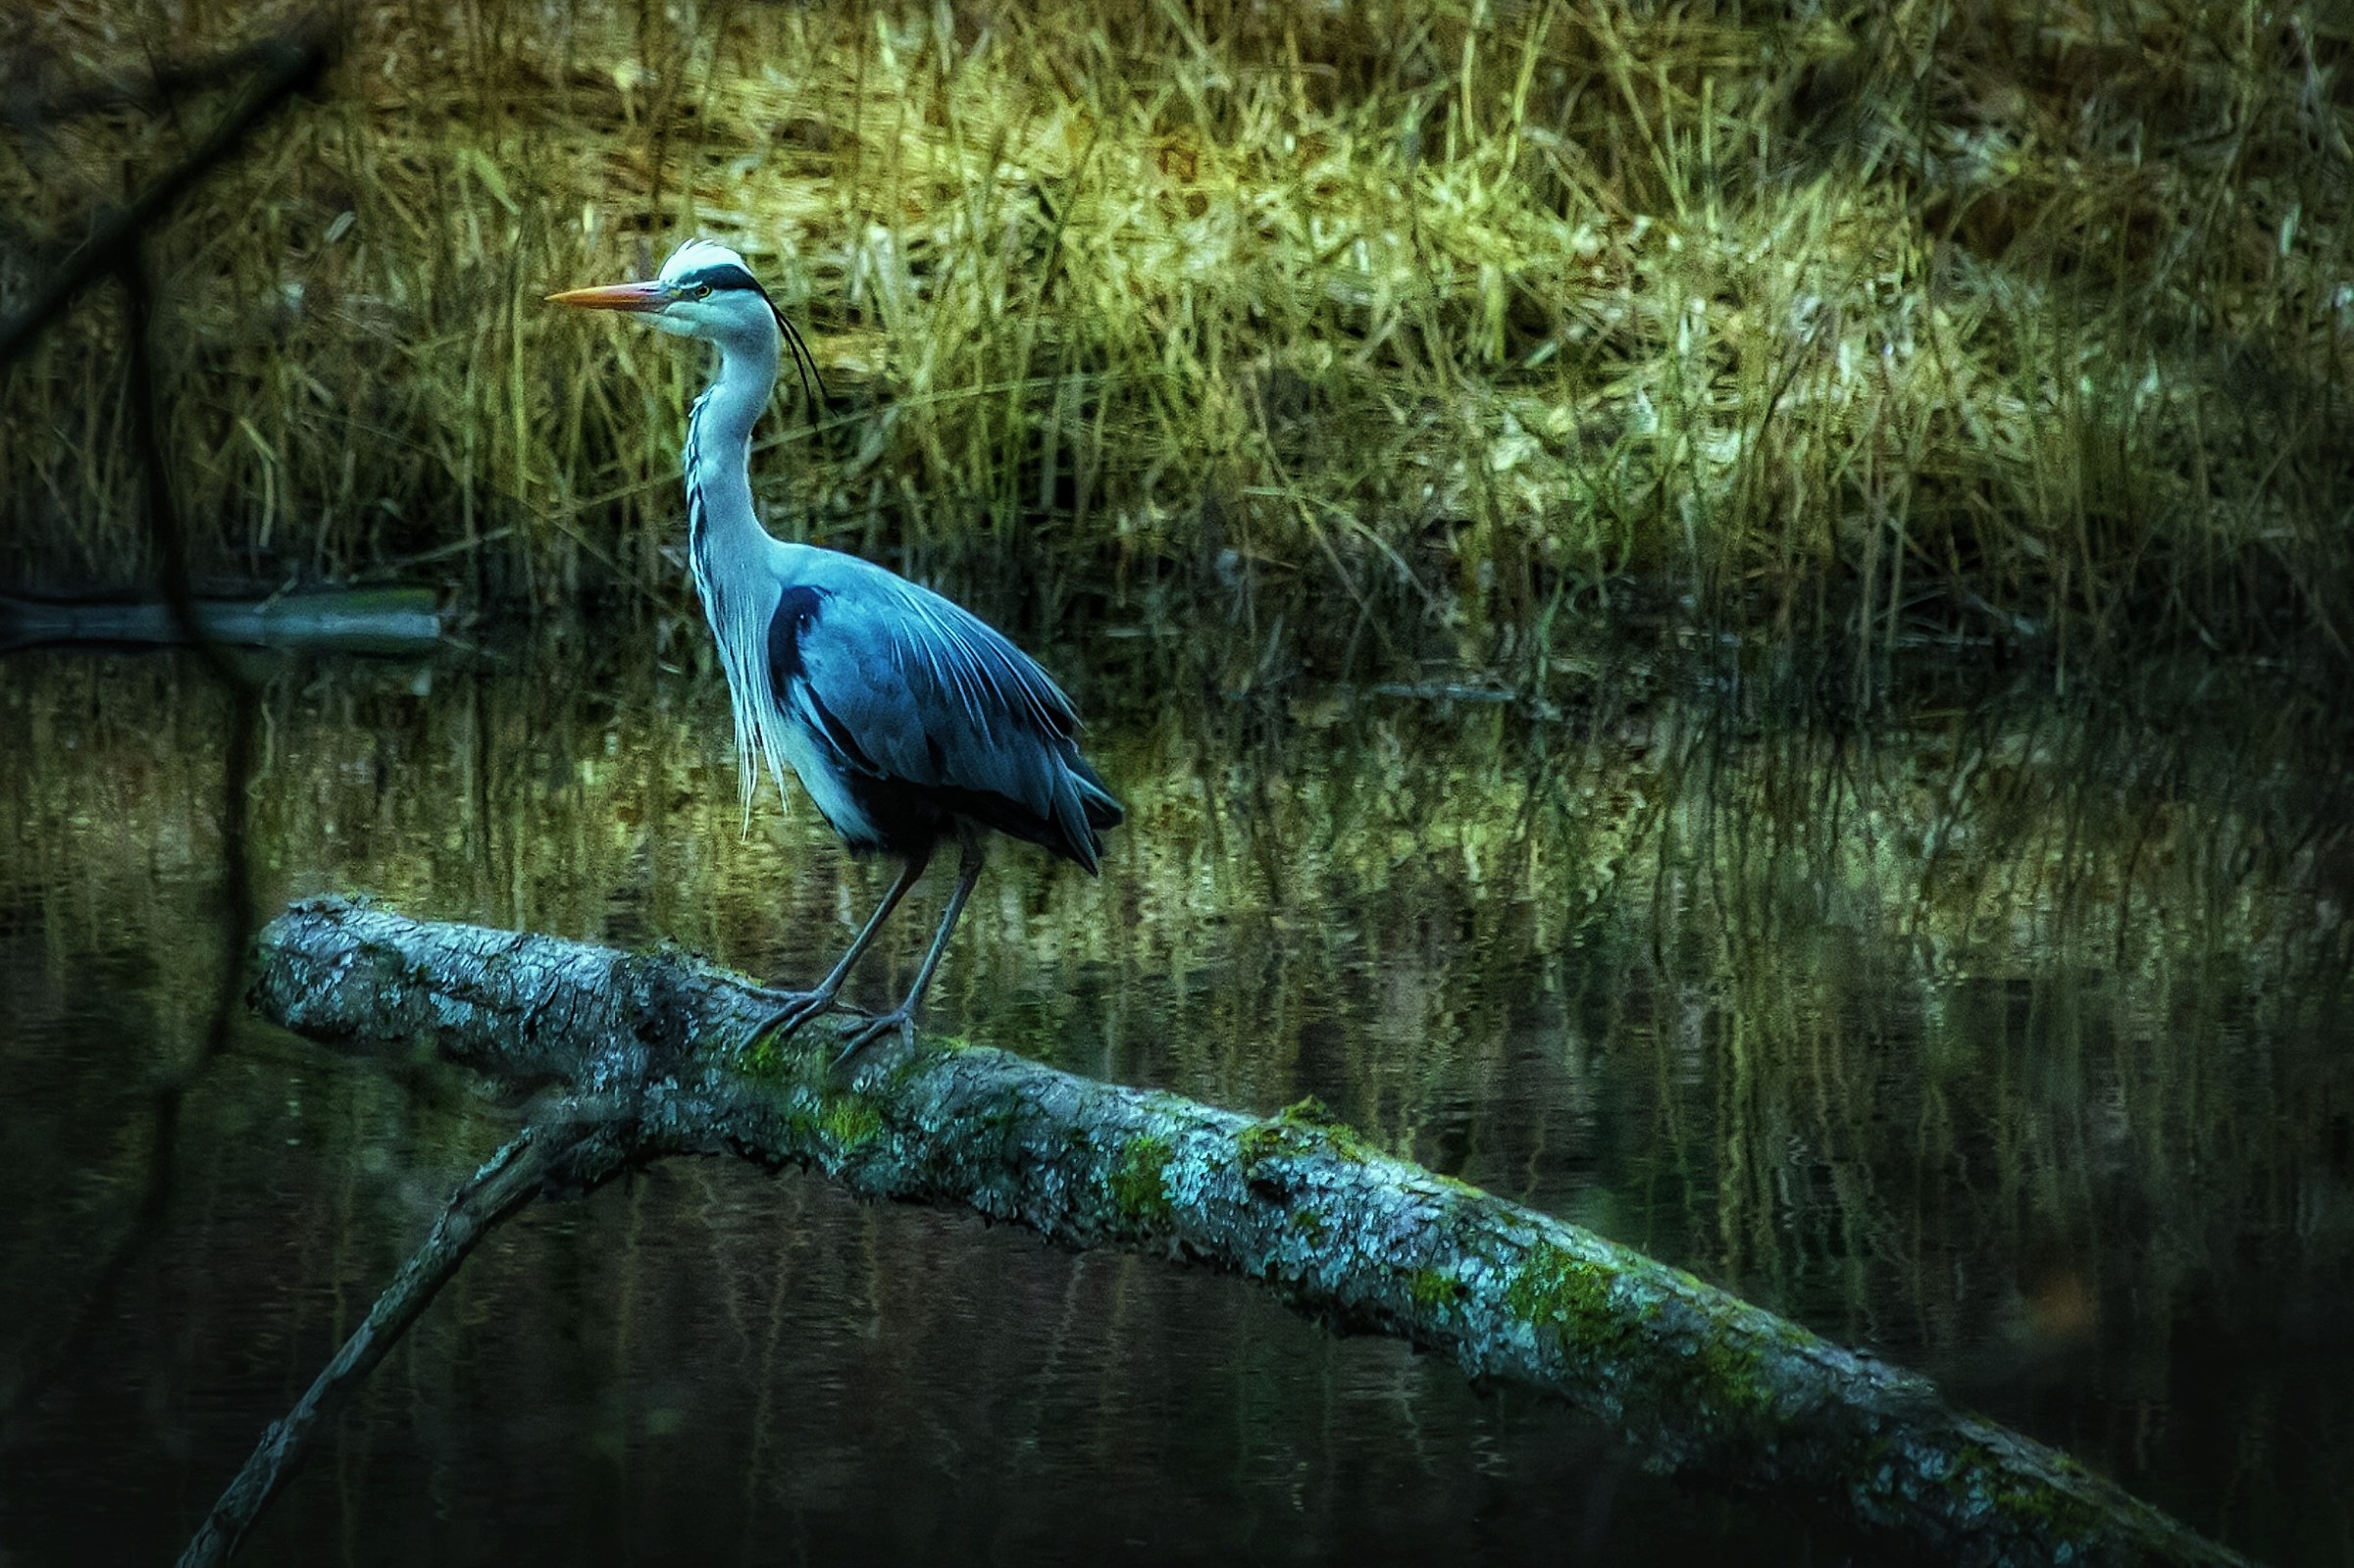 Heron at end of day...